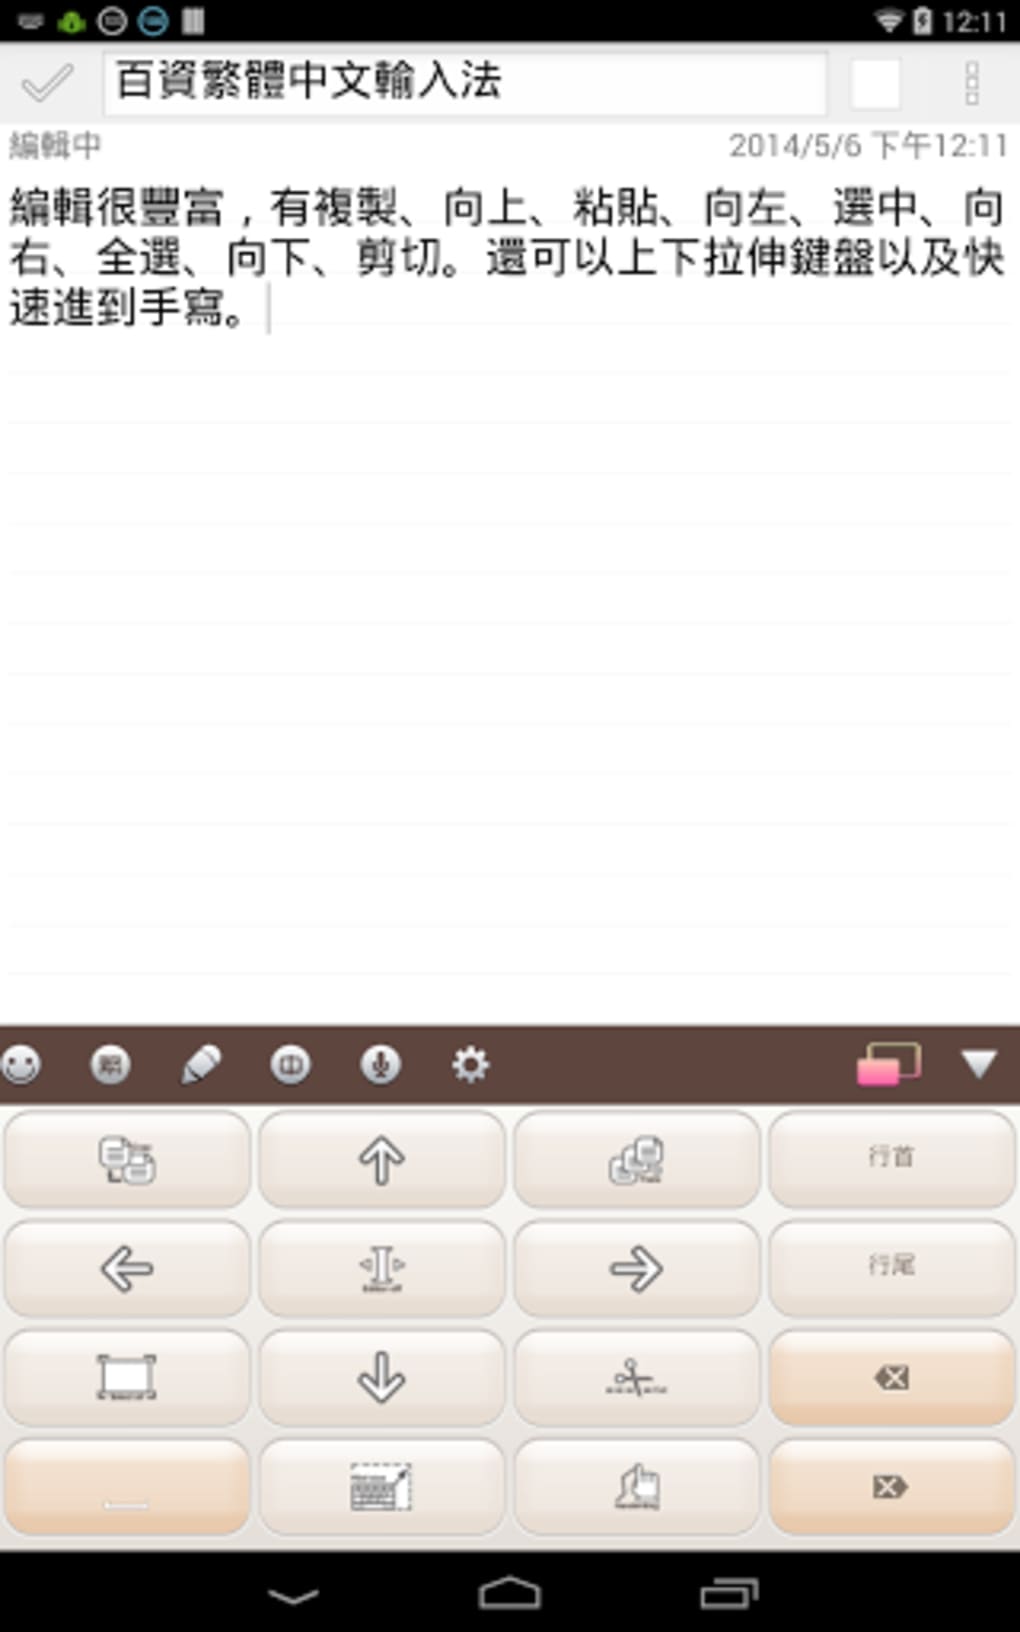 Chinese Keyboard Free Download For Android - optionsabc